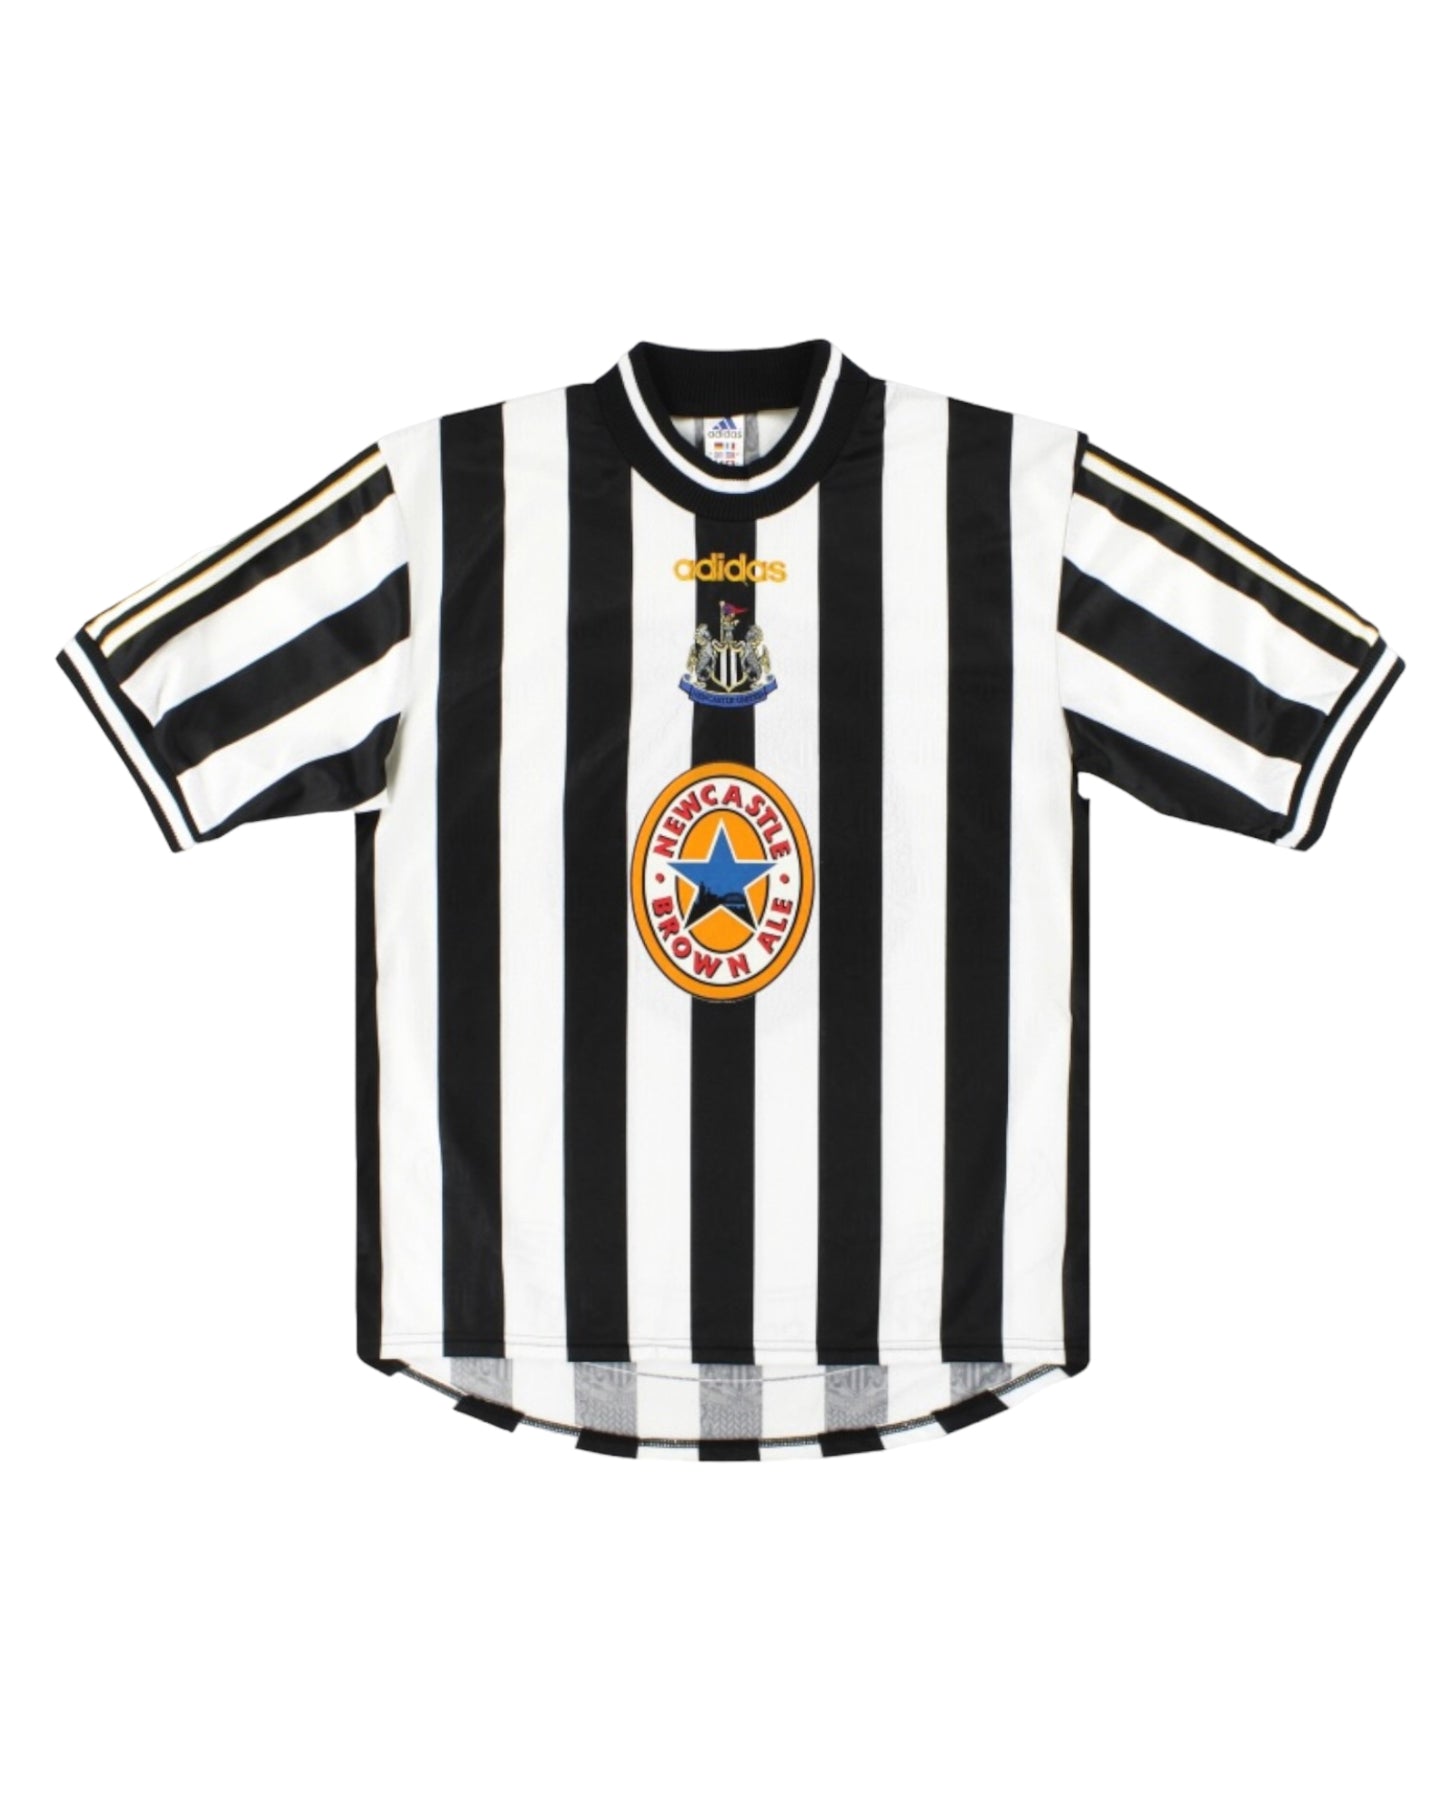 Newcastle Adidas 1997 - 1998 Home Football Shirt Made in England Size M White Black Newcastle Brown Ale